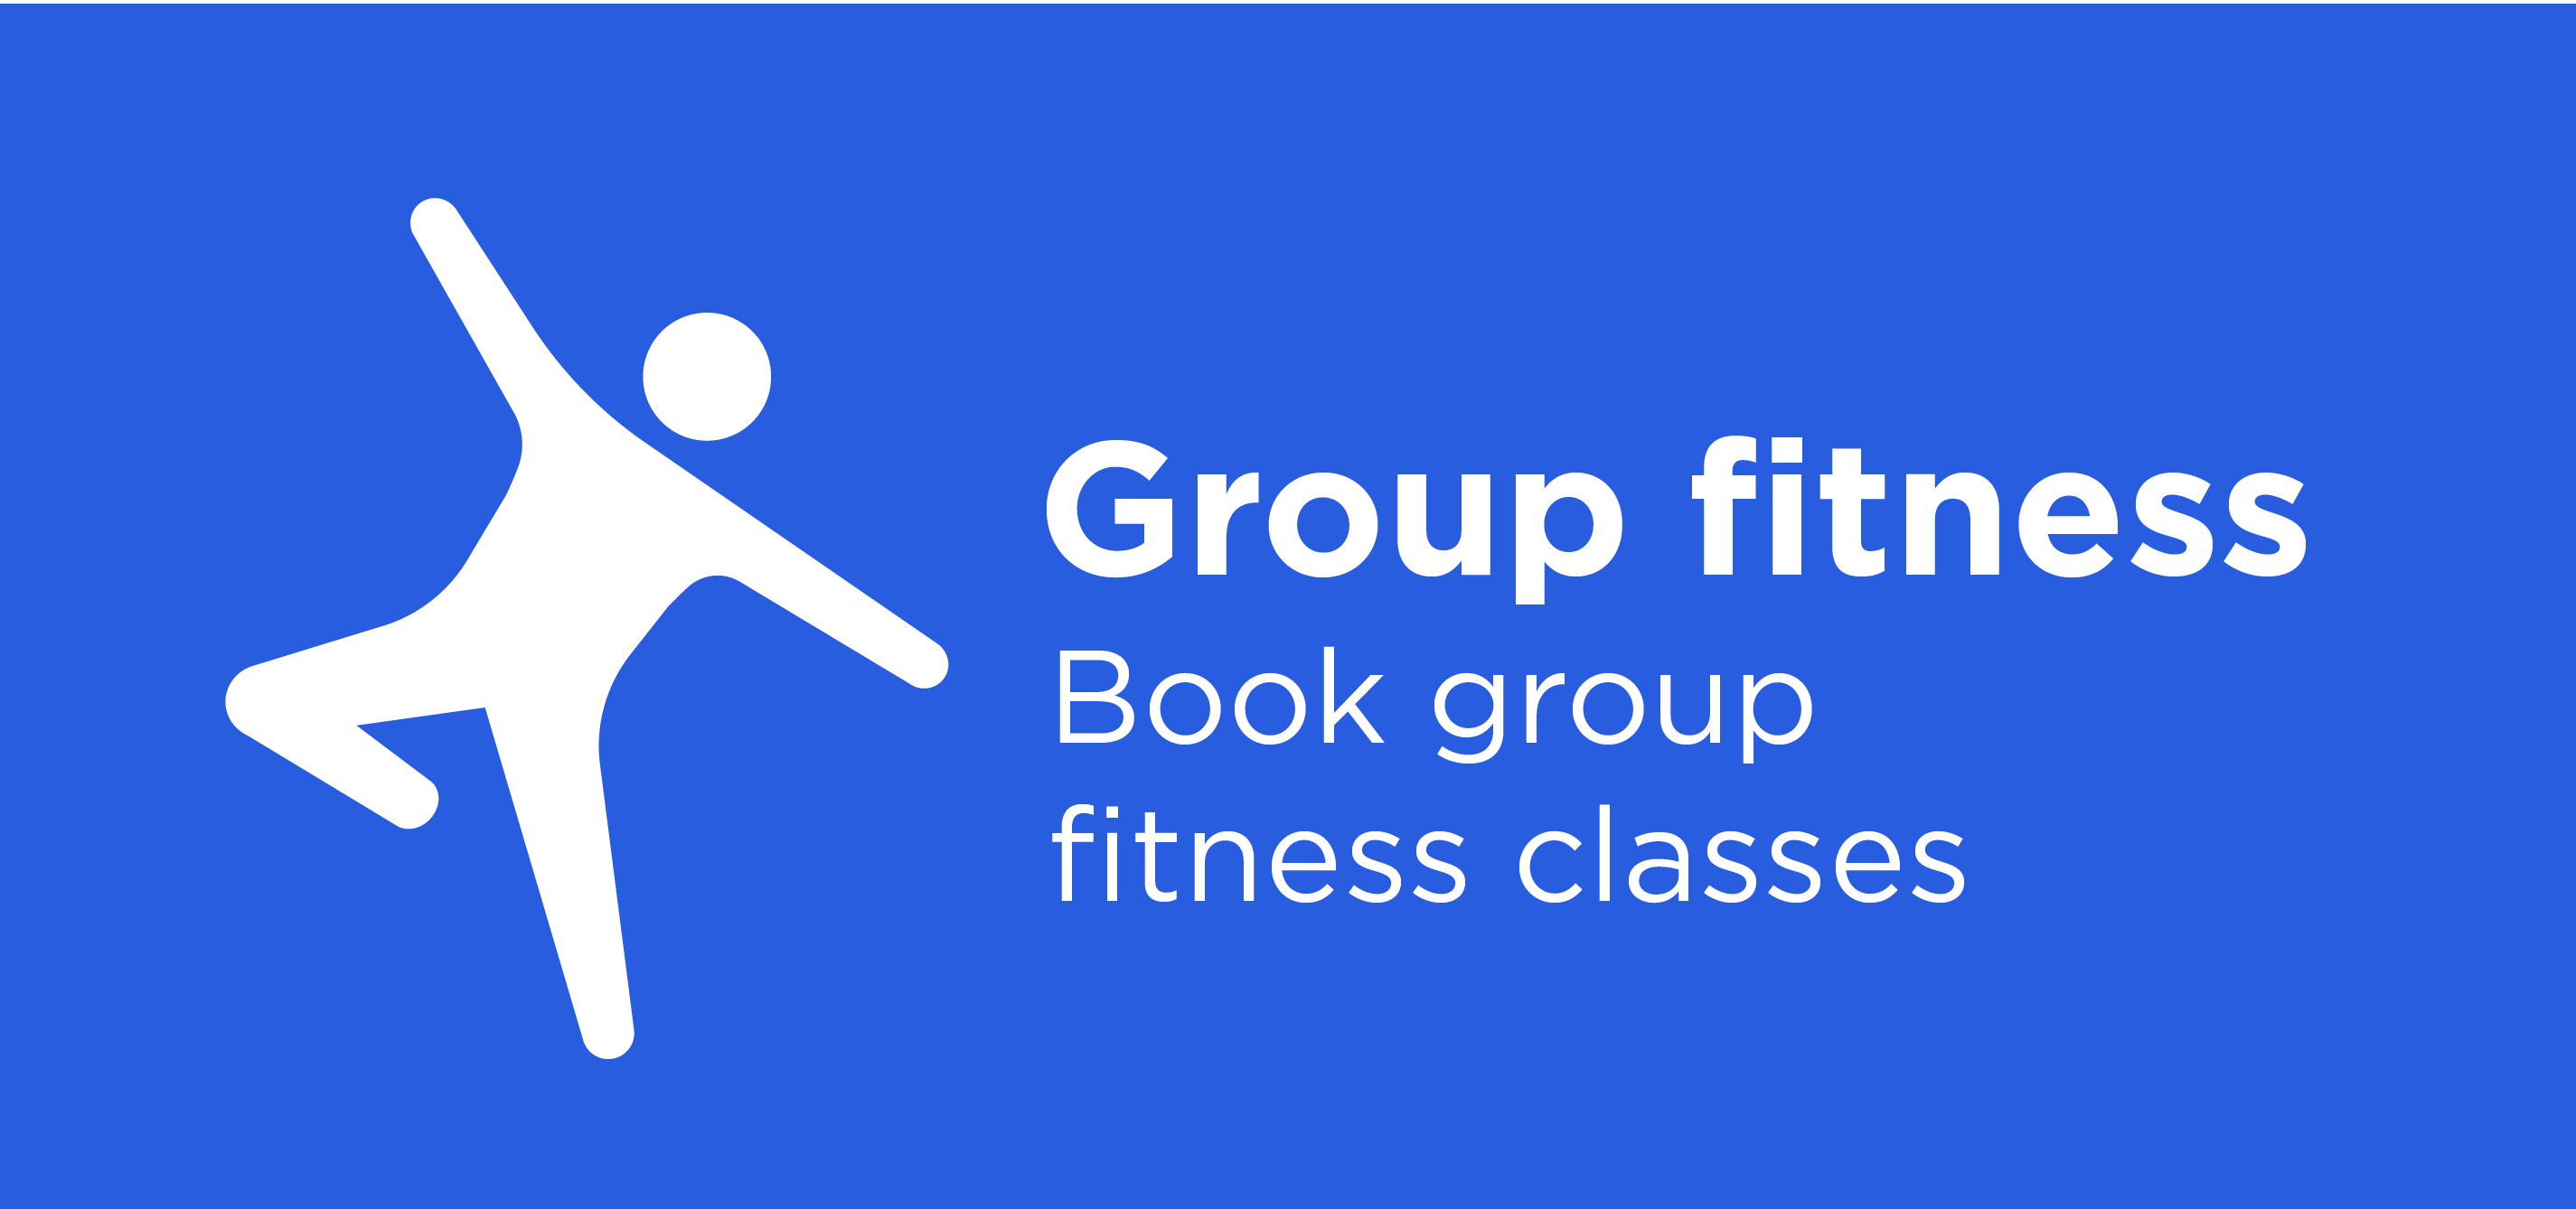 Group Fitness. Please note if you purchase a senior, CSC or Student Fitness Admission we will need to sight the ID cards when you arrive at the pool